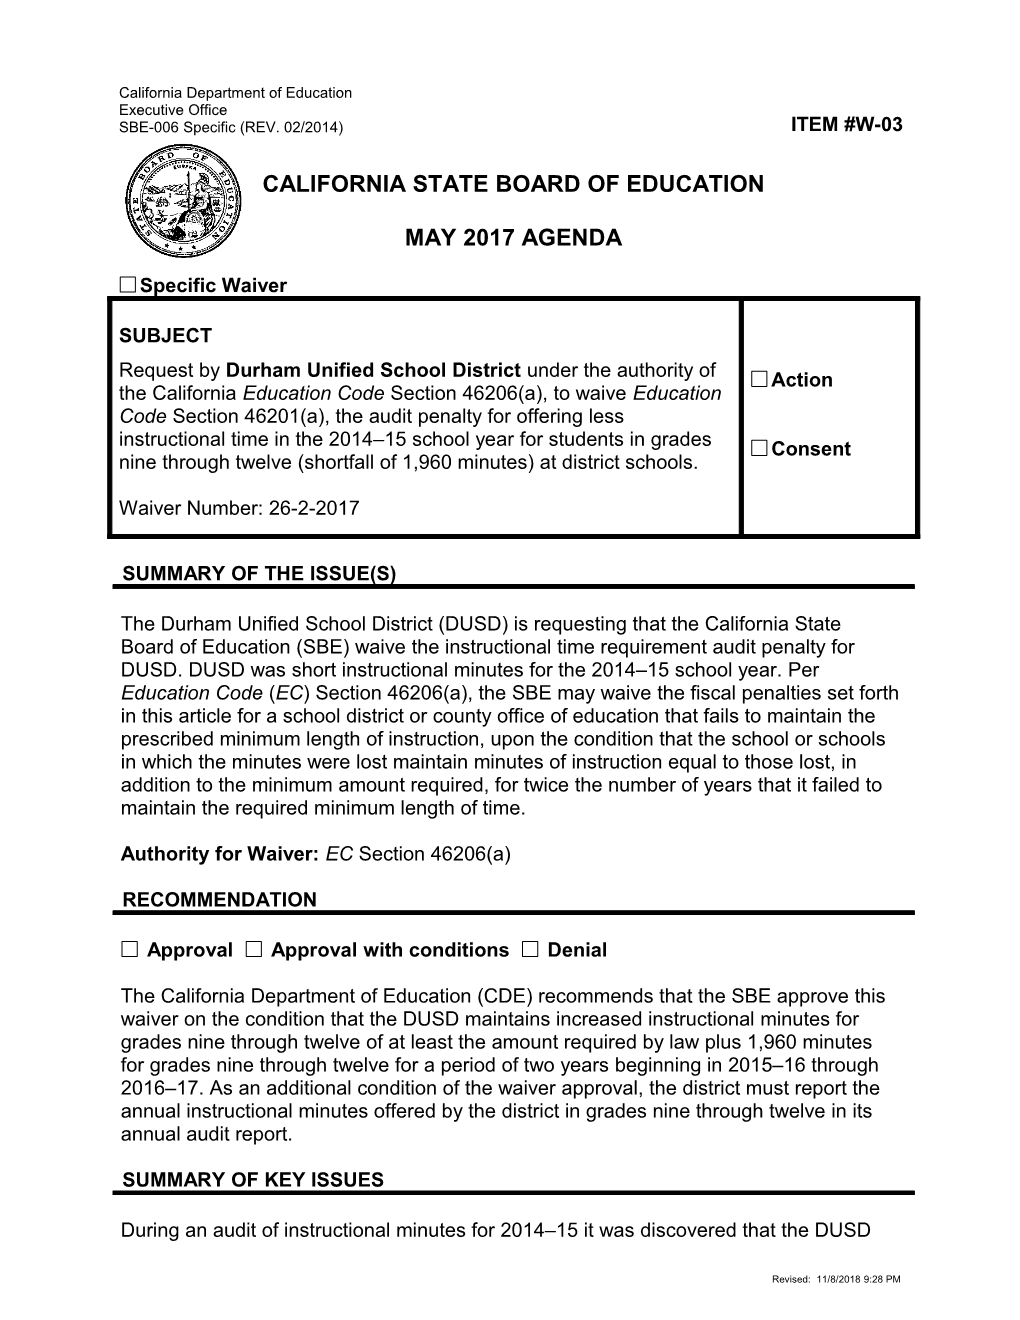 May 2017 Agenda Item W-03 - Meeting Agendas (CA State Board of Education)